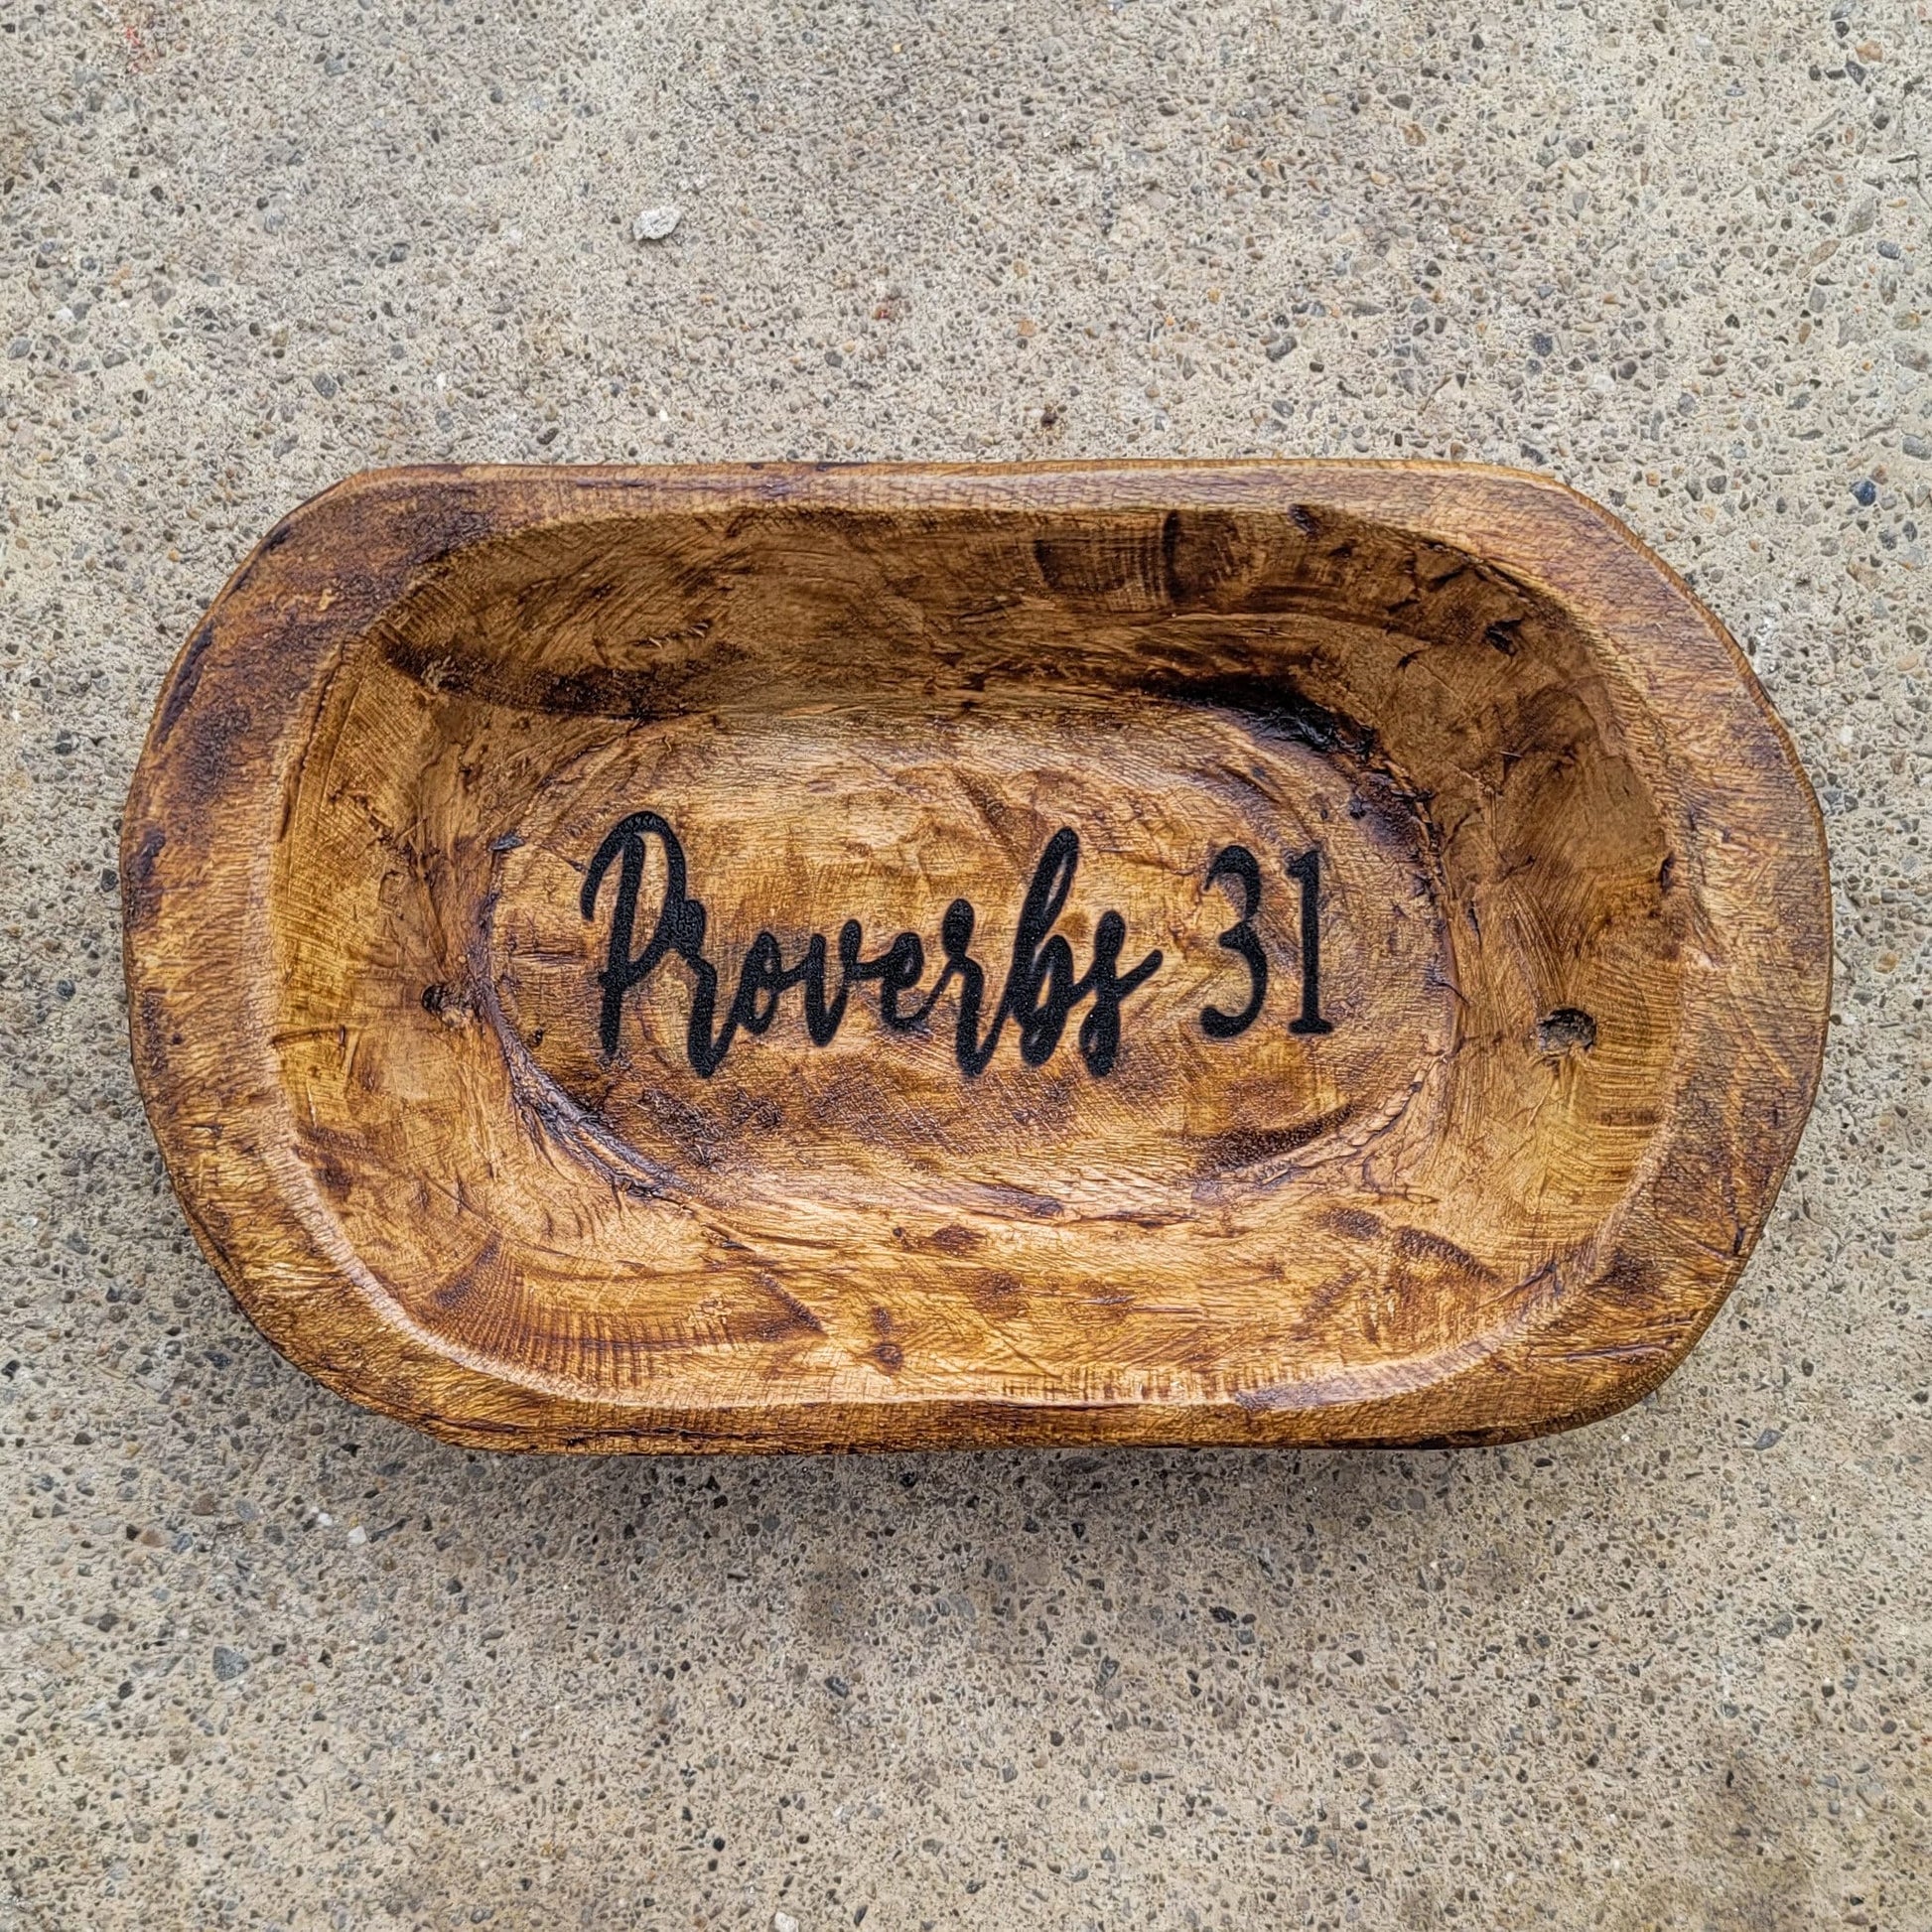 Wooden Scripture Carved Mini Dough Bowl Engraved Prayer Bowl Bible Verse Personalized Bible Christian Engraved Gift